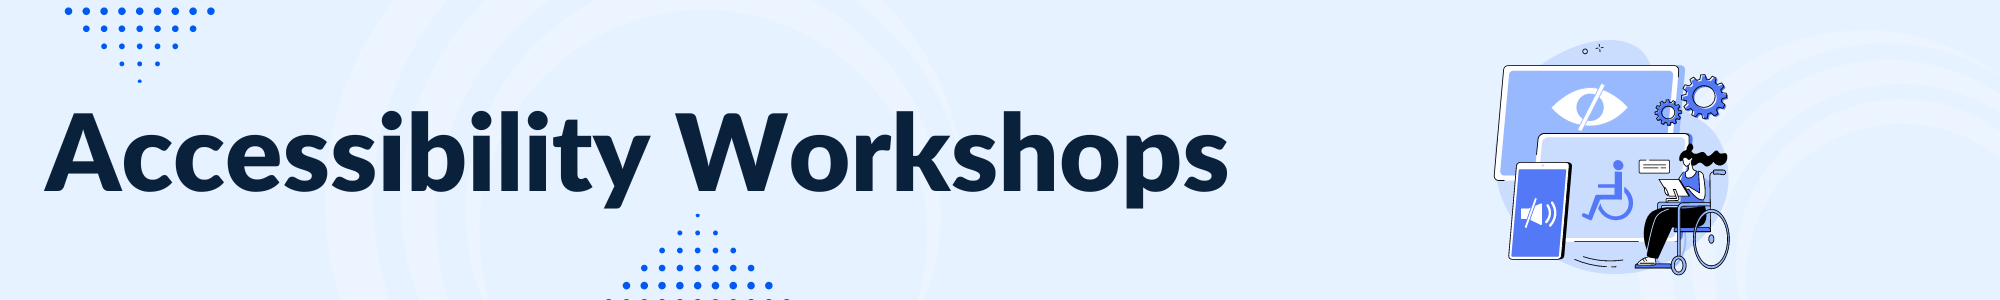 Accessibility Workshops